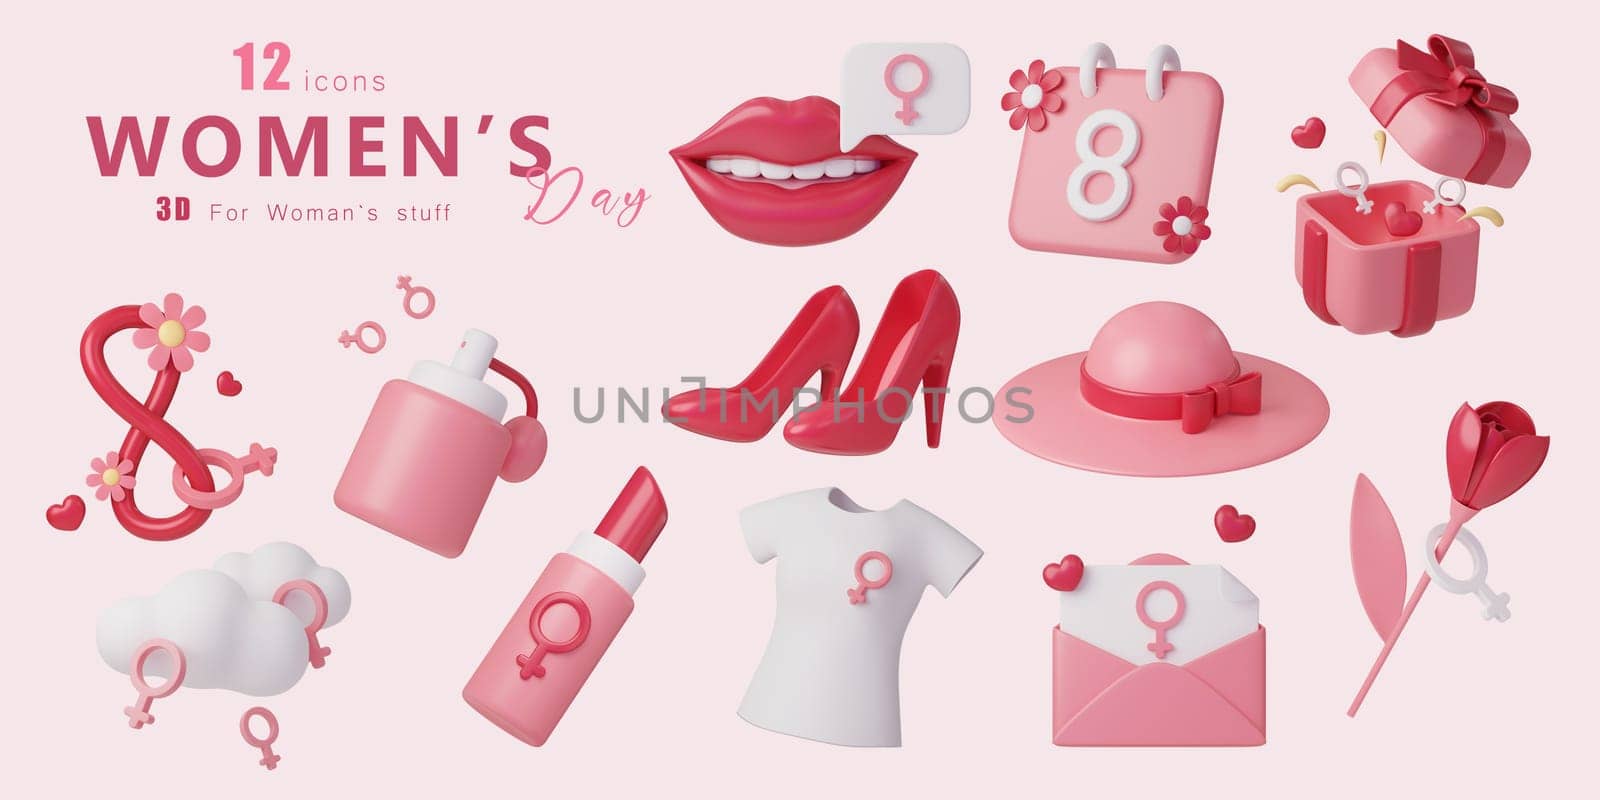 3d Women's stuff icon set , For equality woman's Day, march 8. Raise awareness, prevention, detection, treatment. Icon design 3d illustration by meepiangraphic